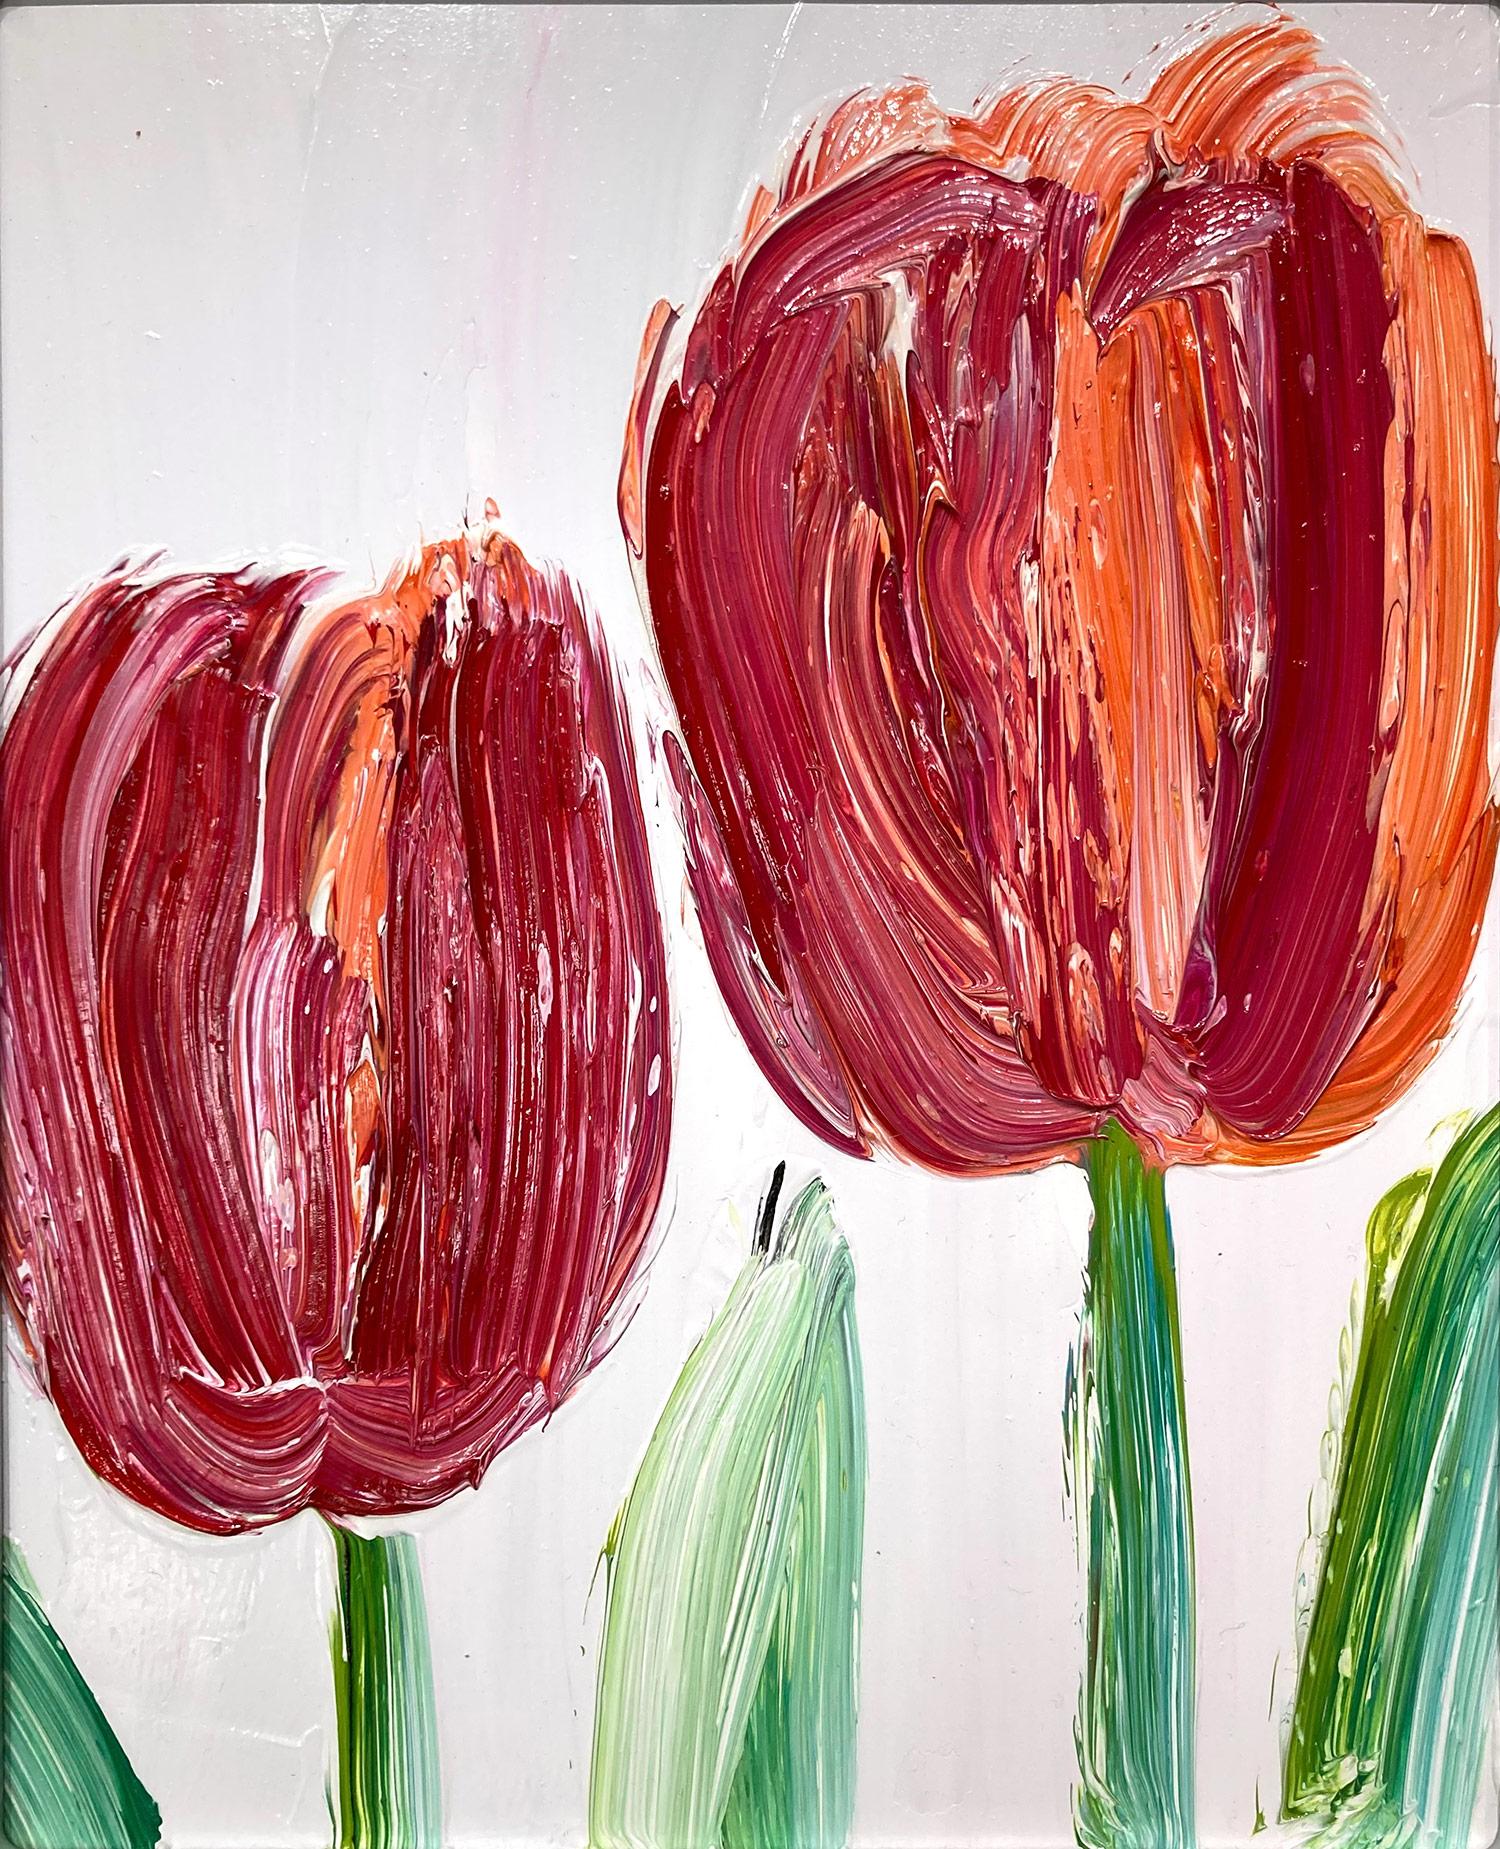 A wonderful composition of one of Slonem's newest series, Tulips. This piece depicts gestural figures of two red and orange Tulips on a soft lavender background with thick use of paint. Inspired by nature and a genuine love for animals, Slonem's